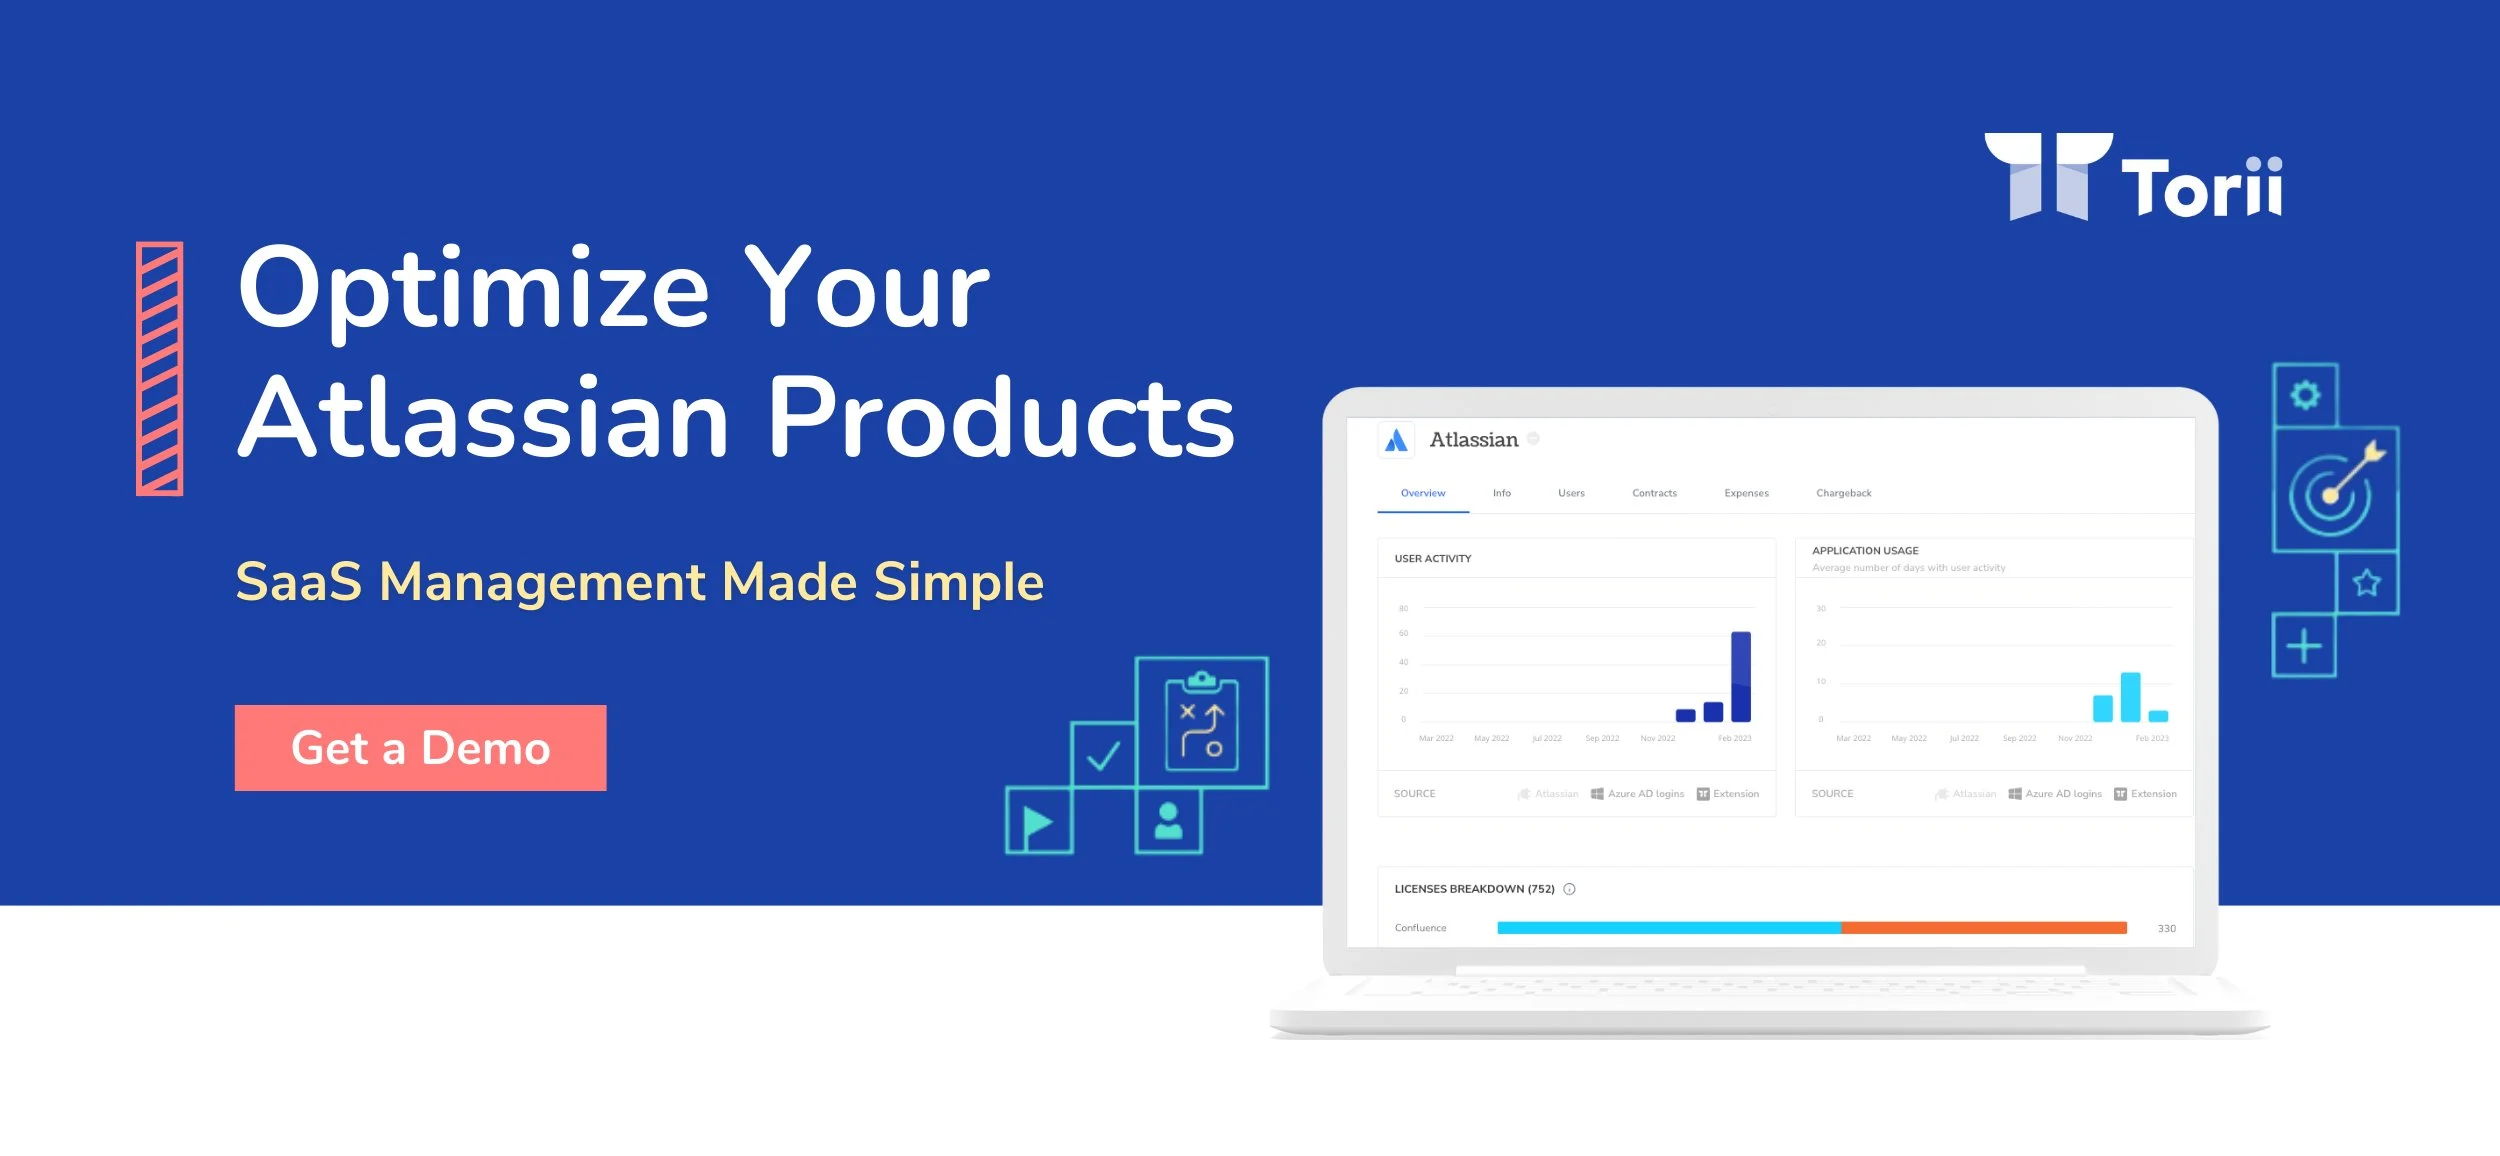 Optimize Your Atlassian Products - Torii